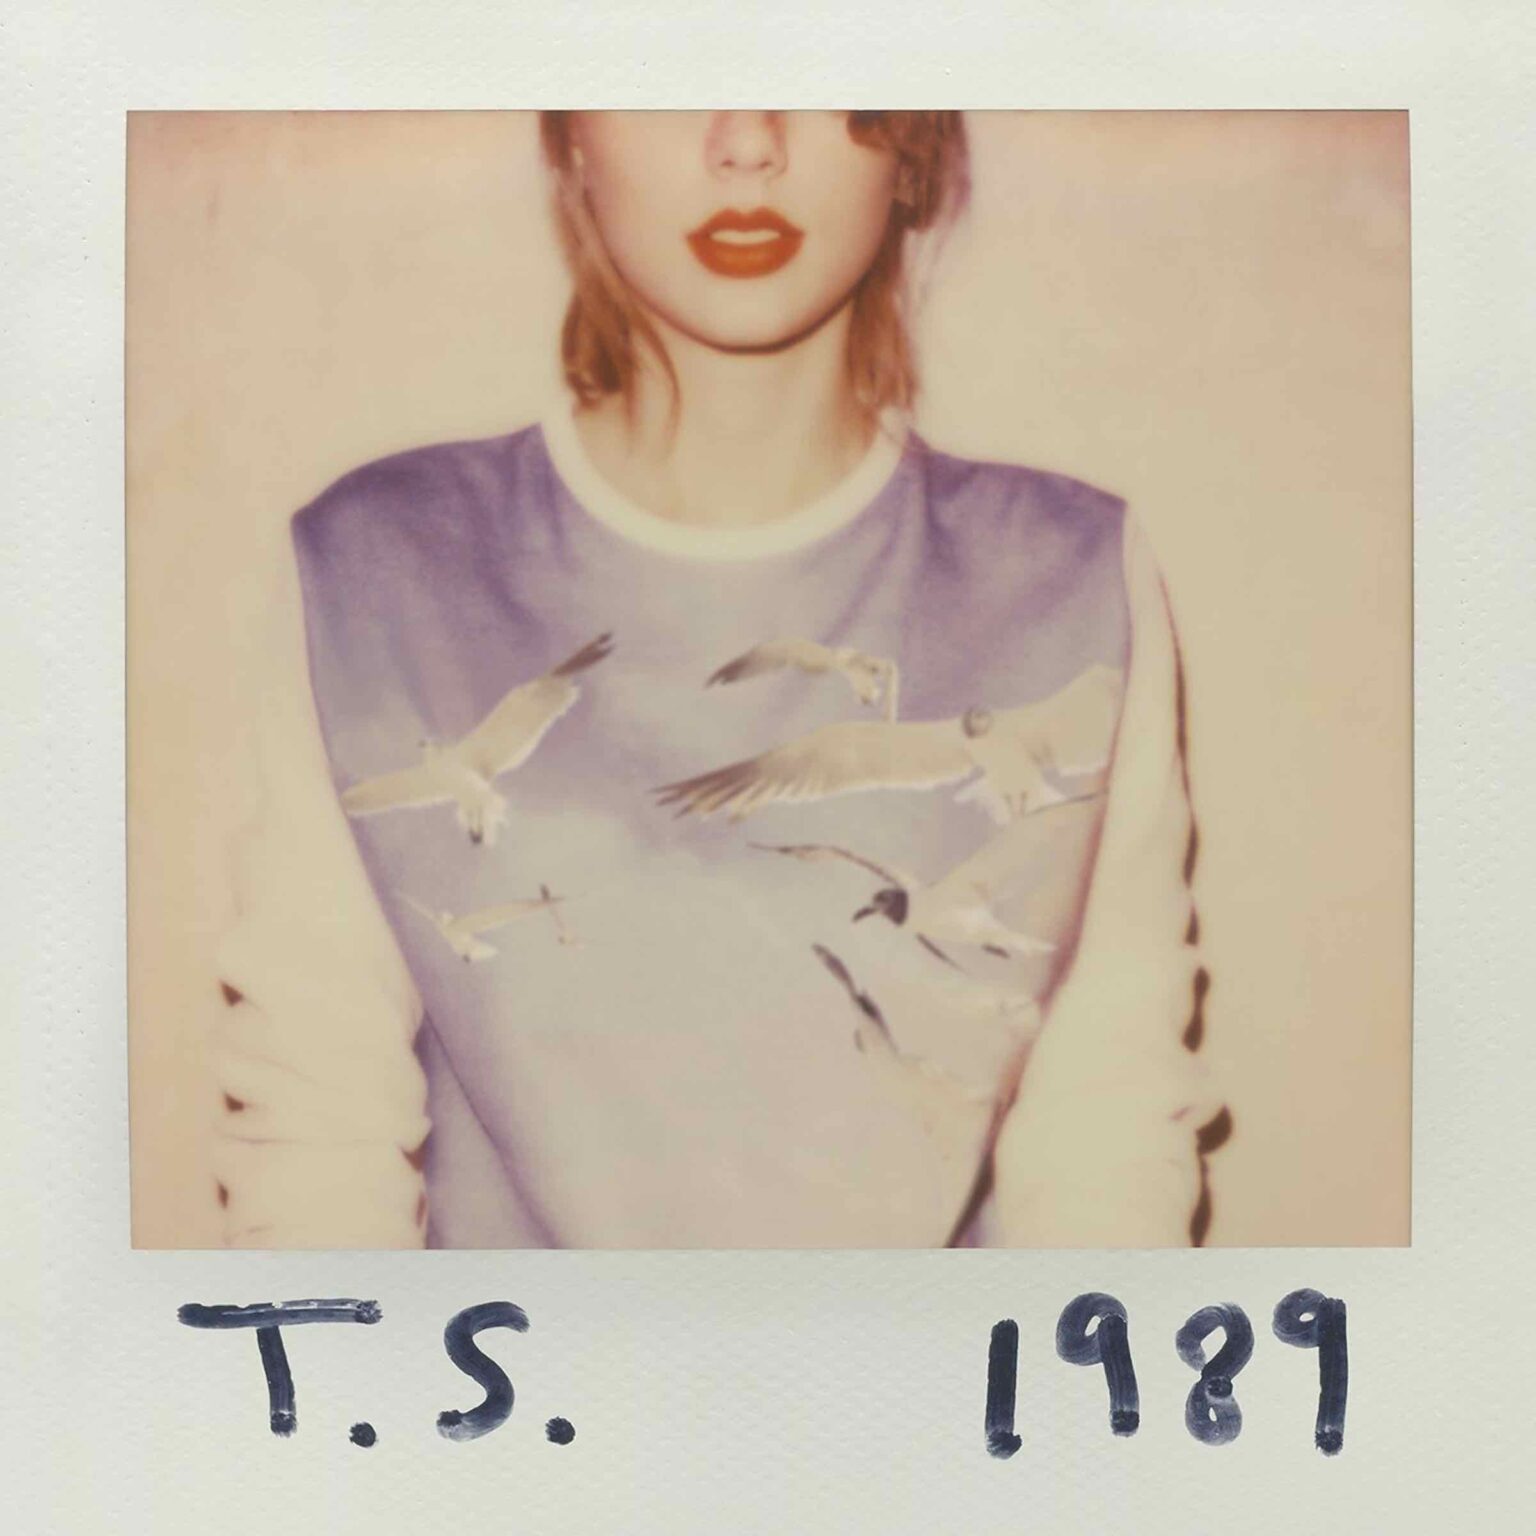 The Swifties claim Taylor Swift will re-release '1989' any day now. Grab your guitars and dive into the hype around the re-release of the songs from '1989'. 